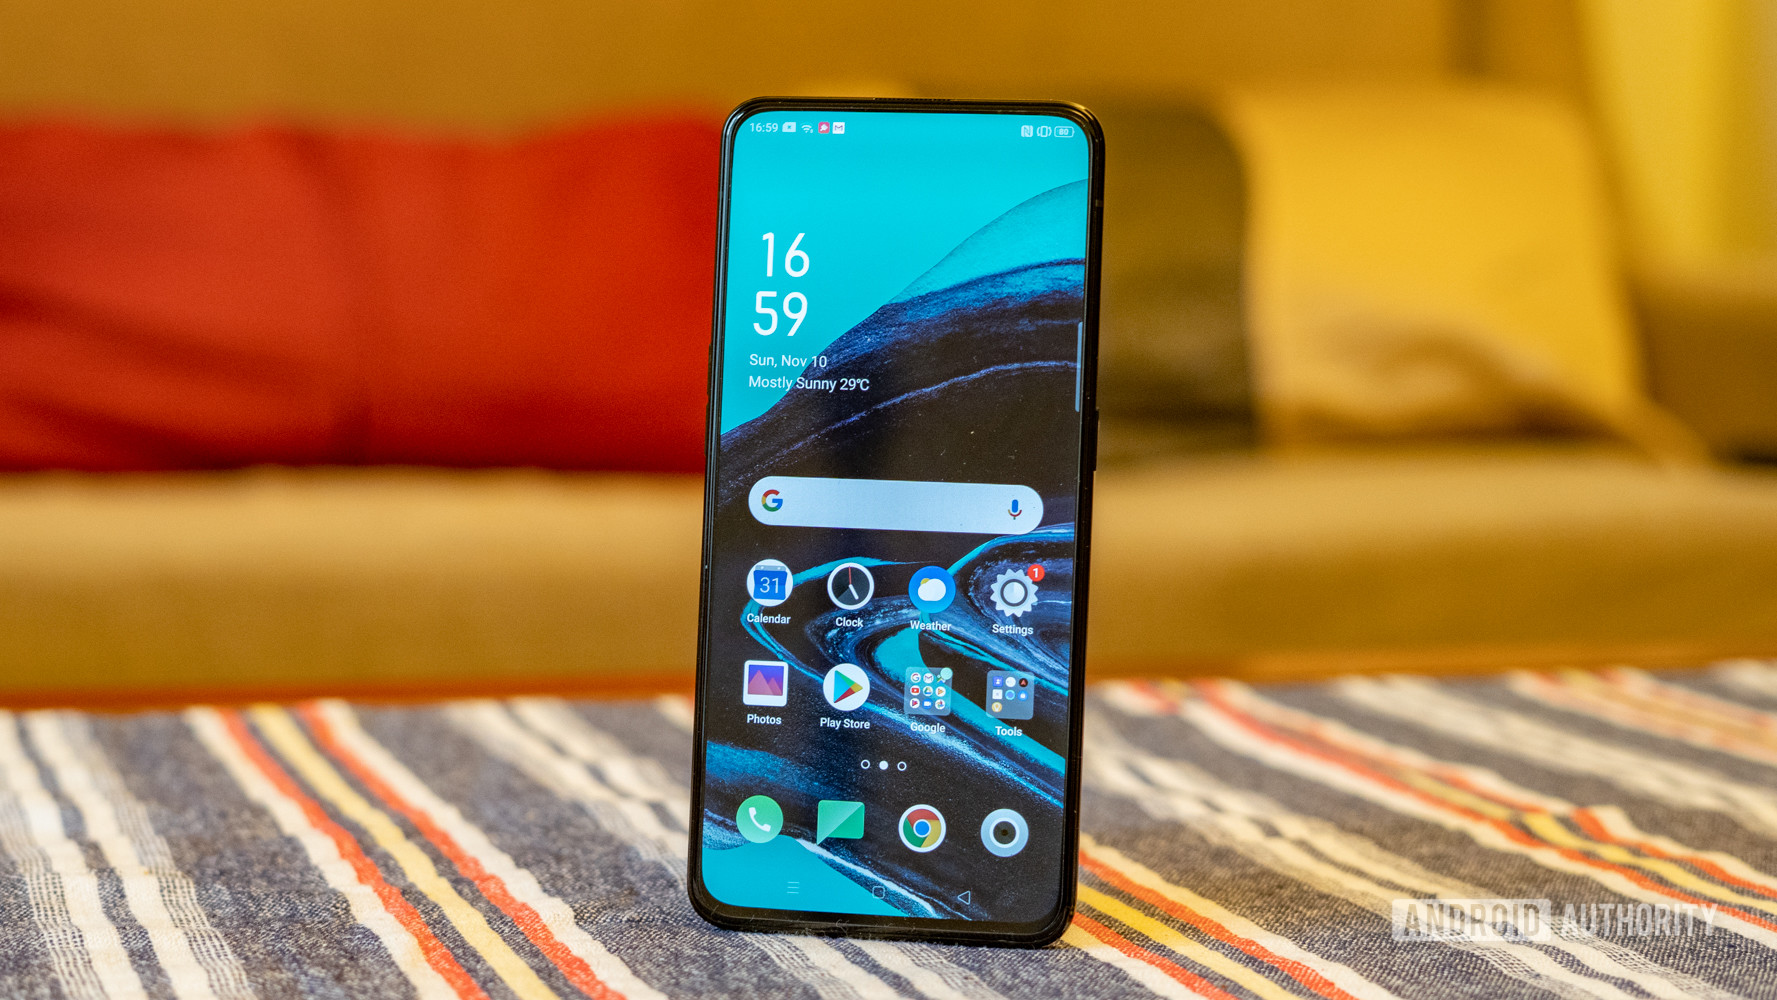 OPPO Reno 2 showing front display